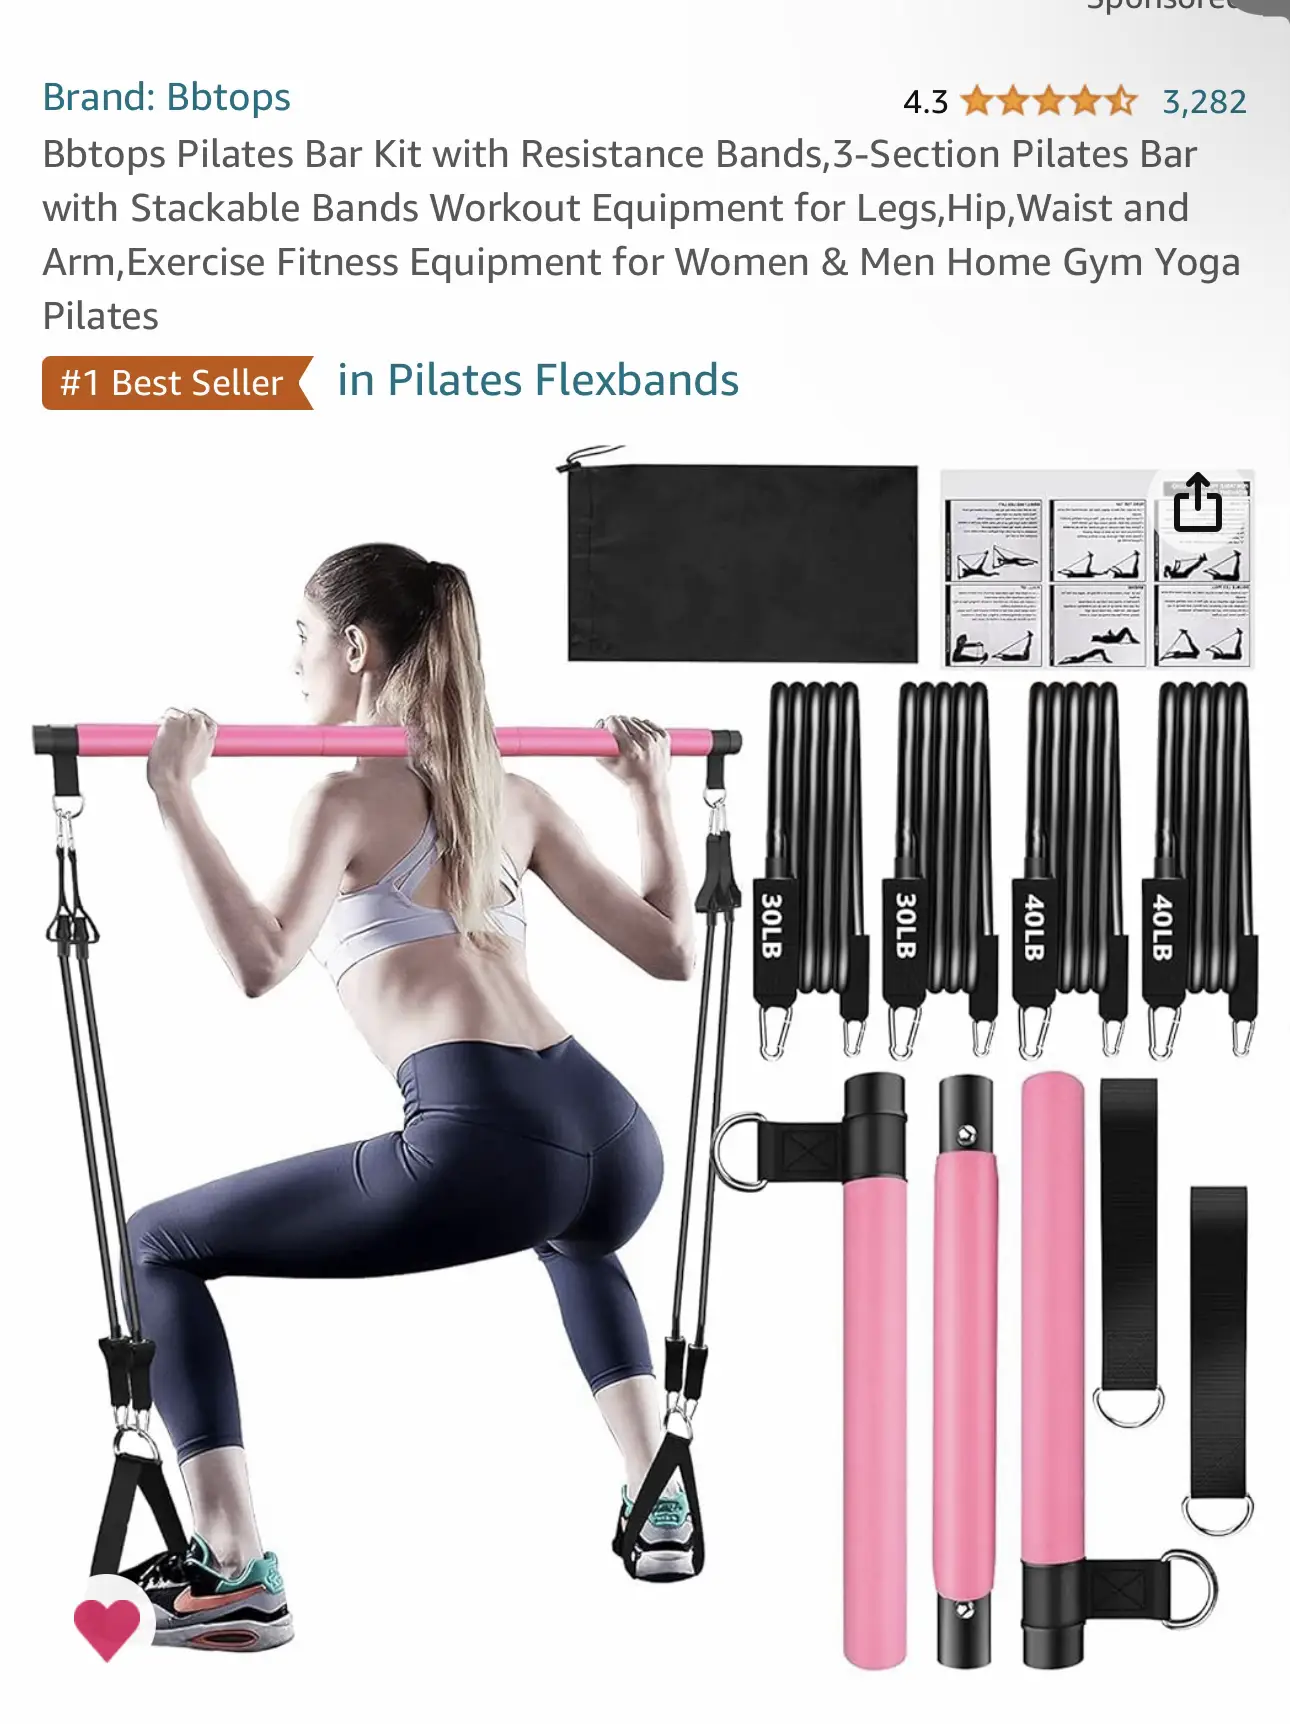 Multifunctional Pilates Bar Kit with Resistance Bands (25,30,35lb) and  Videos | Portable Workout Equipment Home Gym for Women & Men of All Heights  